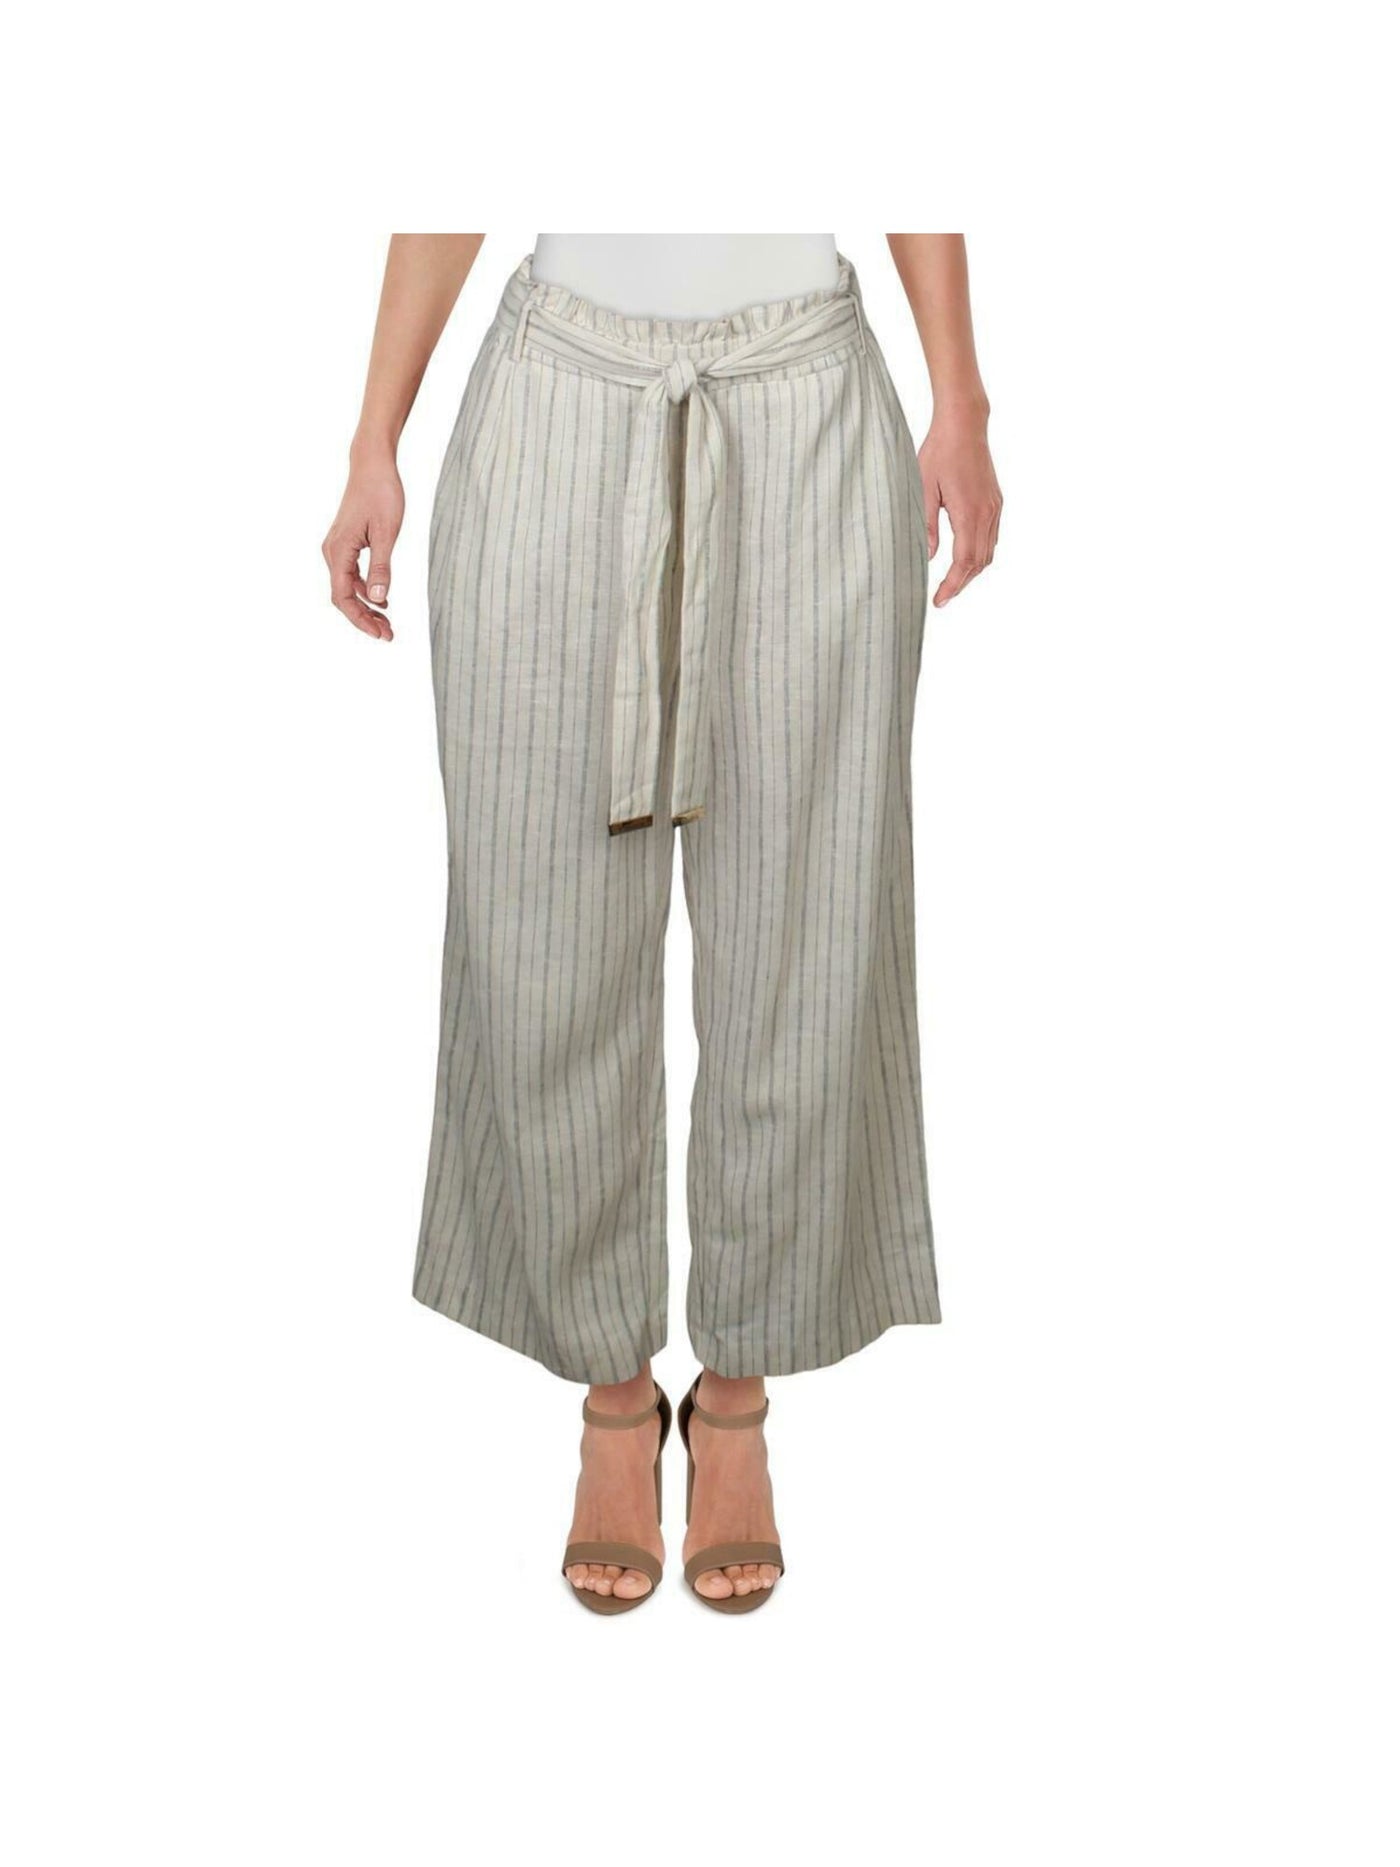 CALVIN KLEIN Womens Gathered Tie Mid Rise Linen Paperbag Wear To Work Cropped Pants